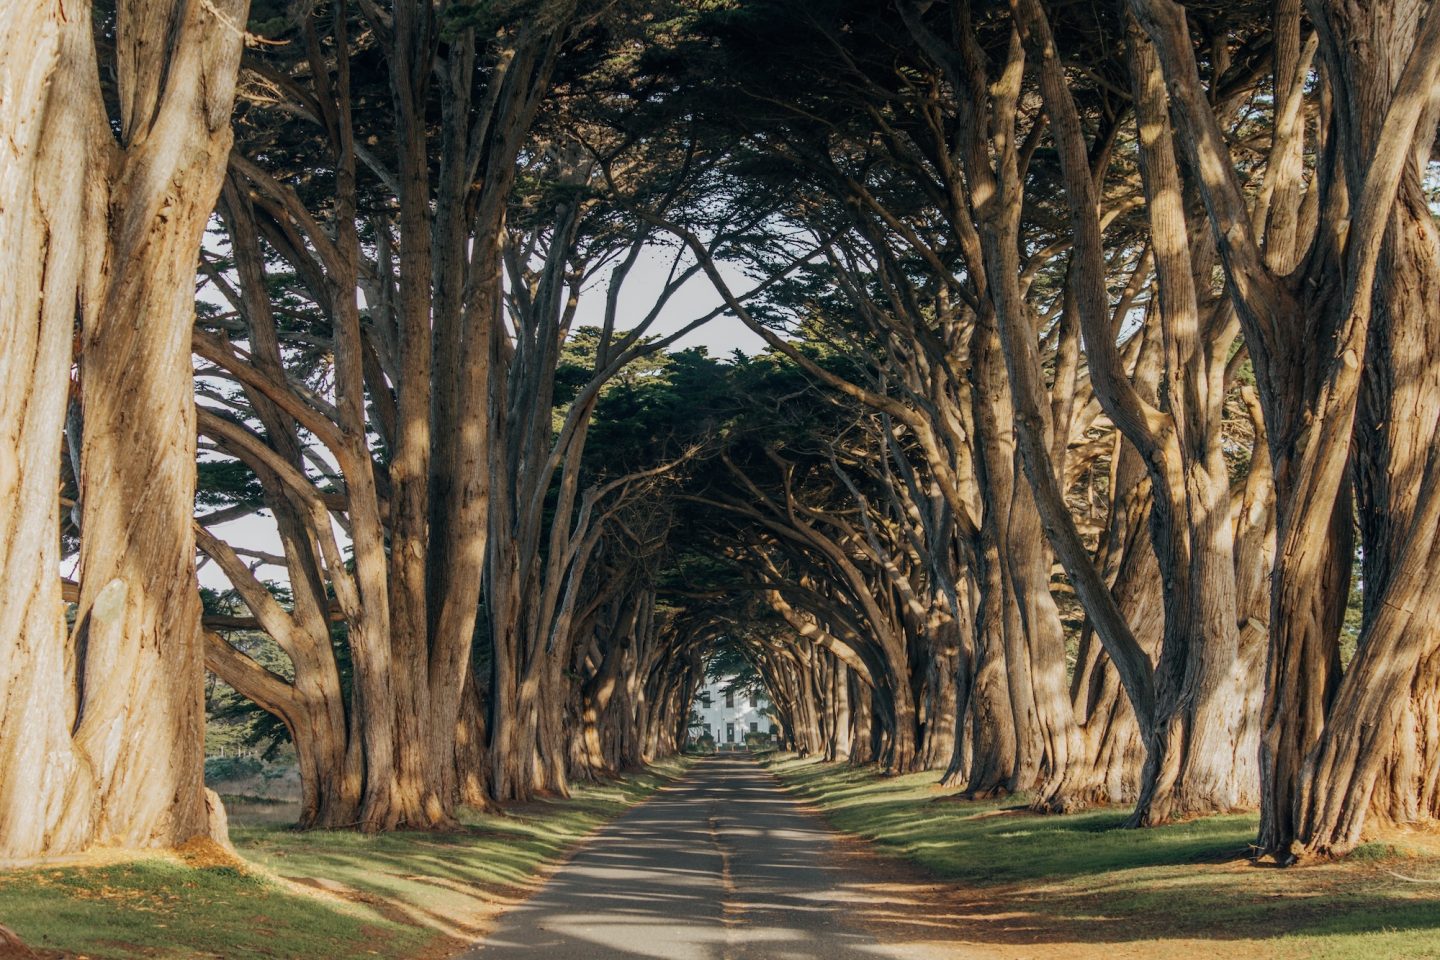 Soft Adventure Day Trip from San Francisco to Point Reyes Cypress Tree Tunnel